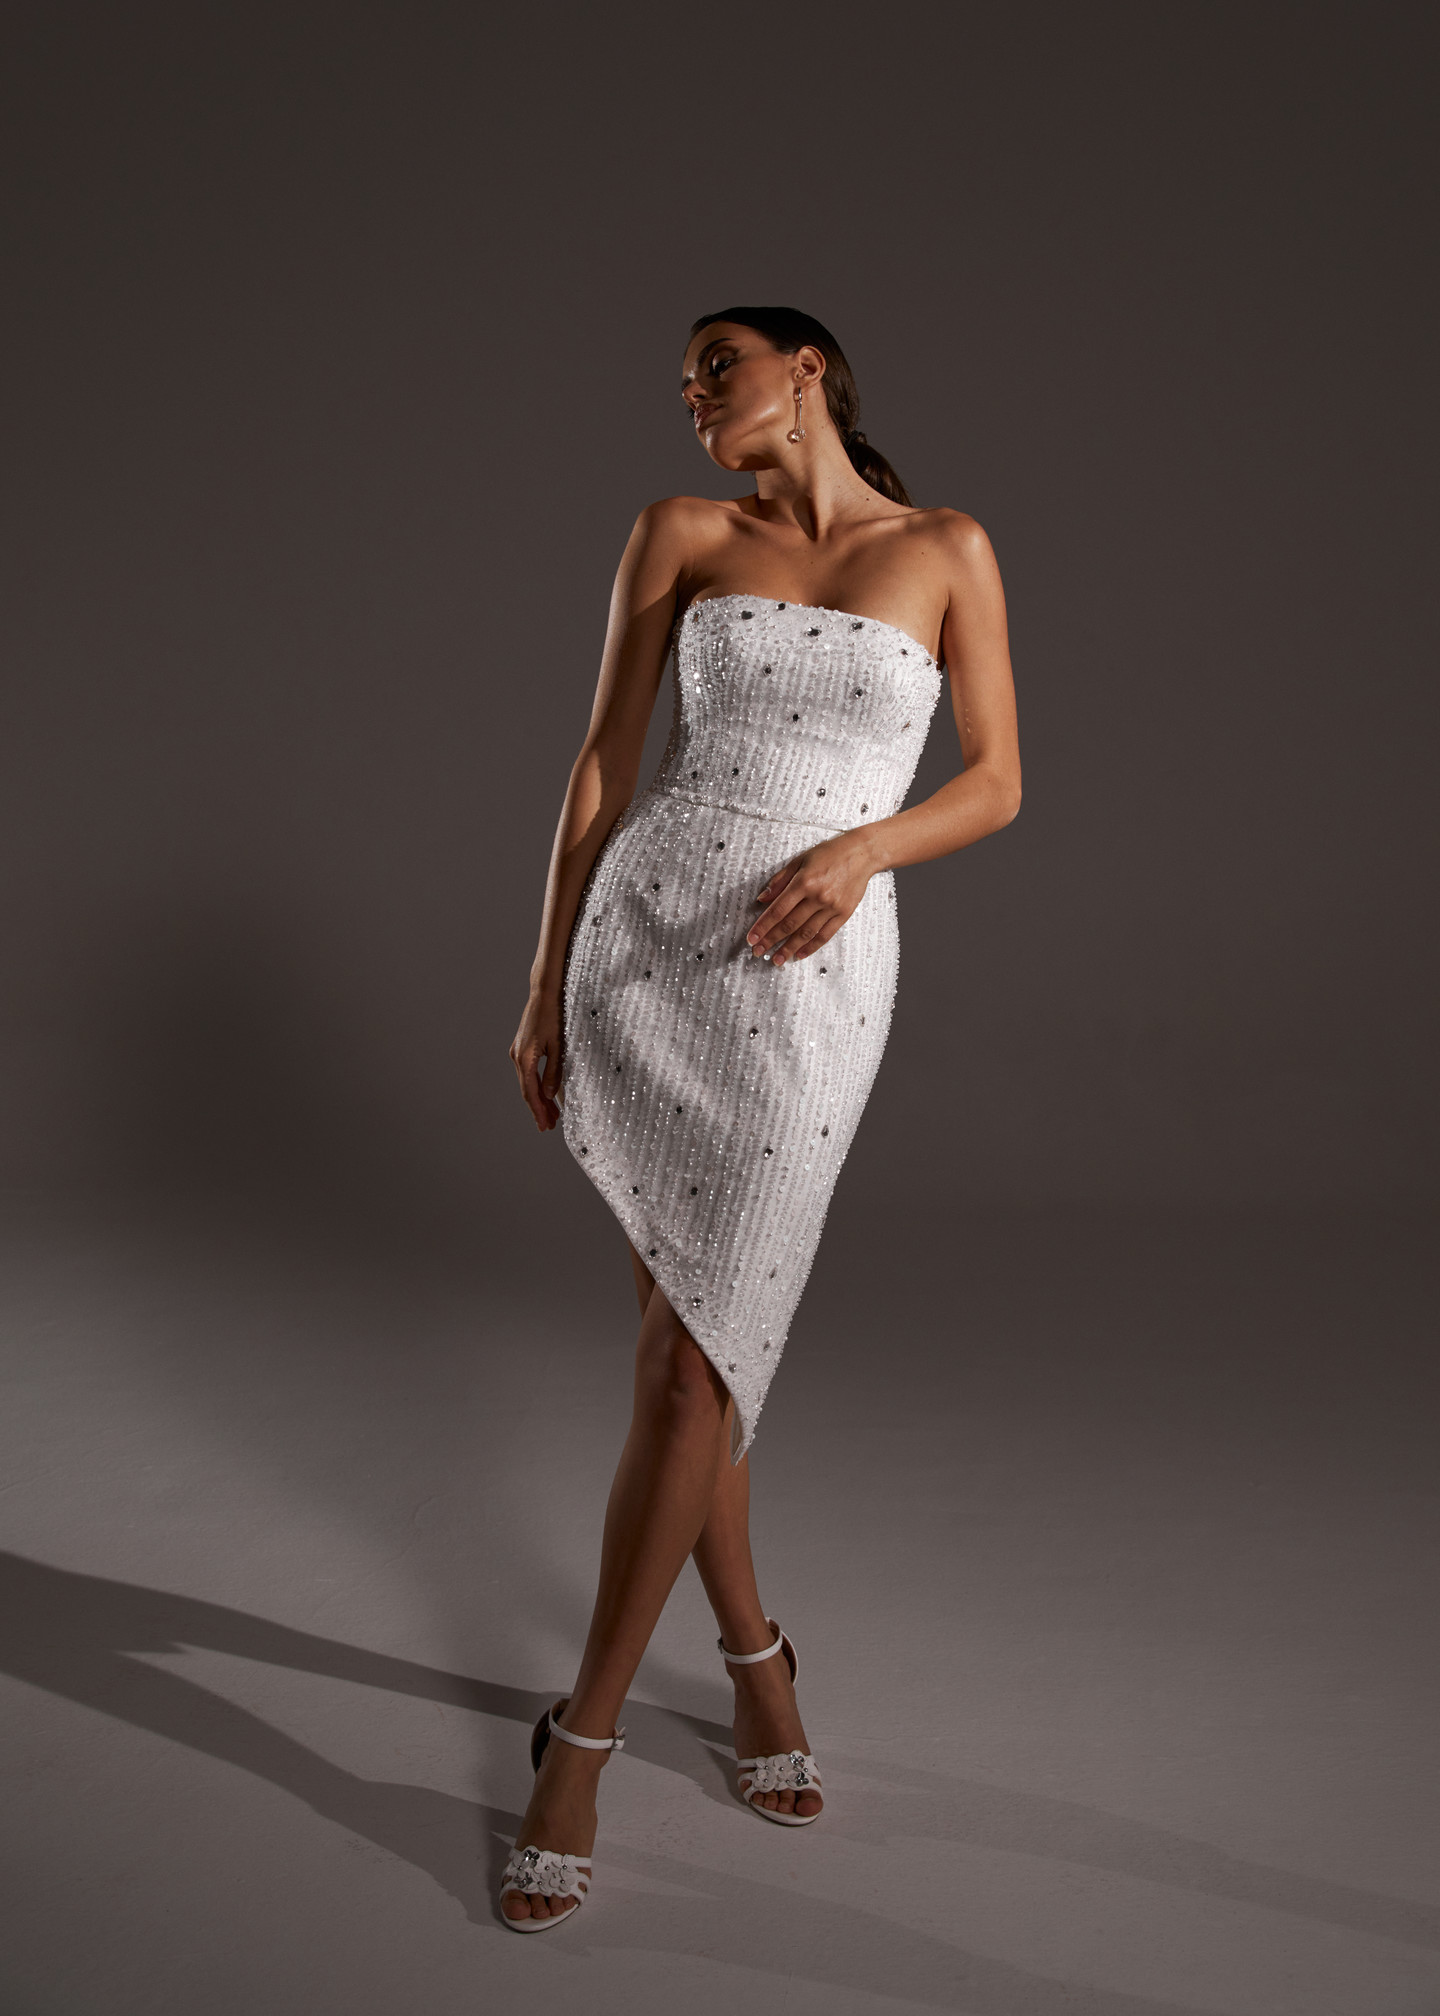 Sindy dress, 2021, couture, dress, bridal, off-white, embroidery, sheath silhouette